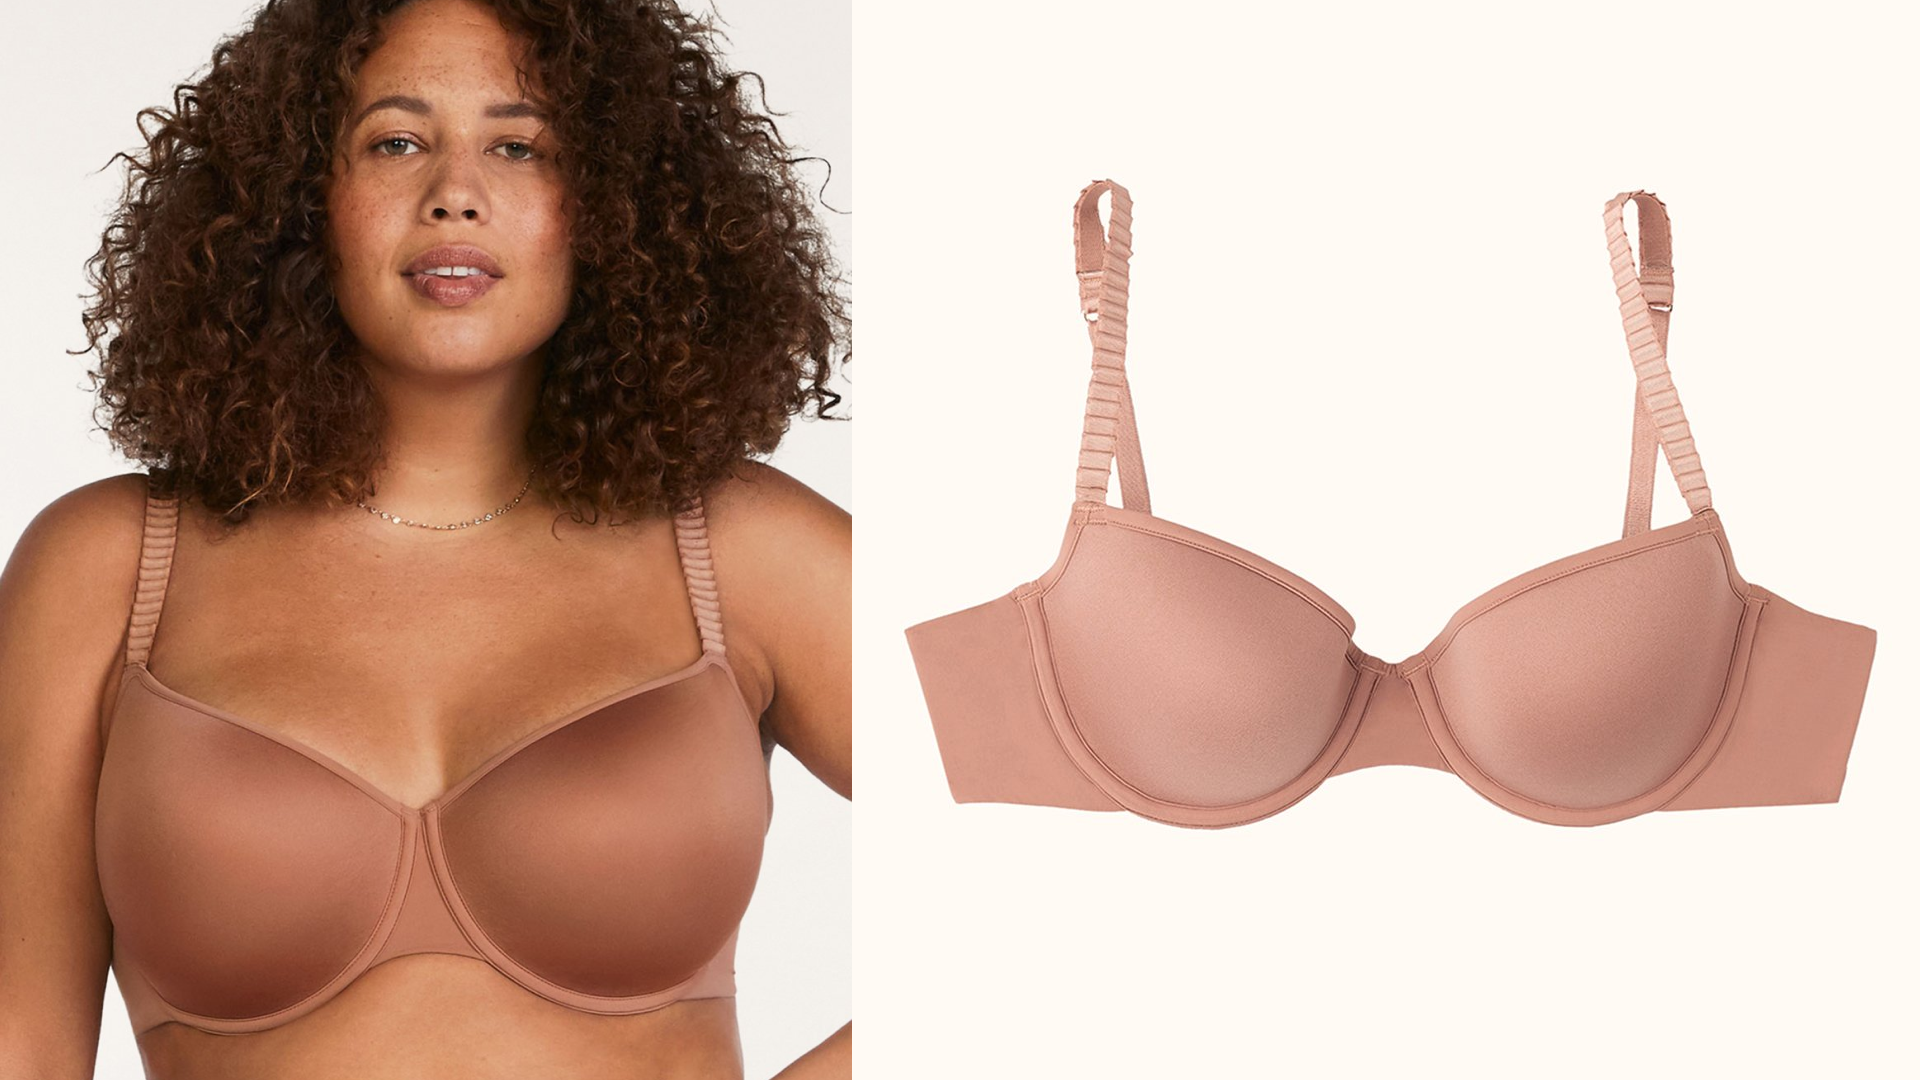 Molke - Everyone deserves to feel good! That's why our Original bras are  designed with support and comfort in mind. In one of the best ready-to-wear  size ranges available online! Michelle is